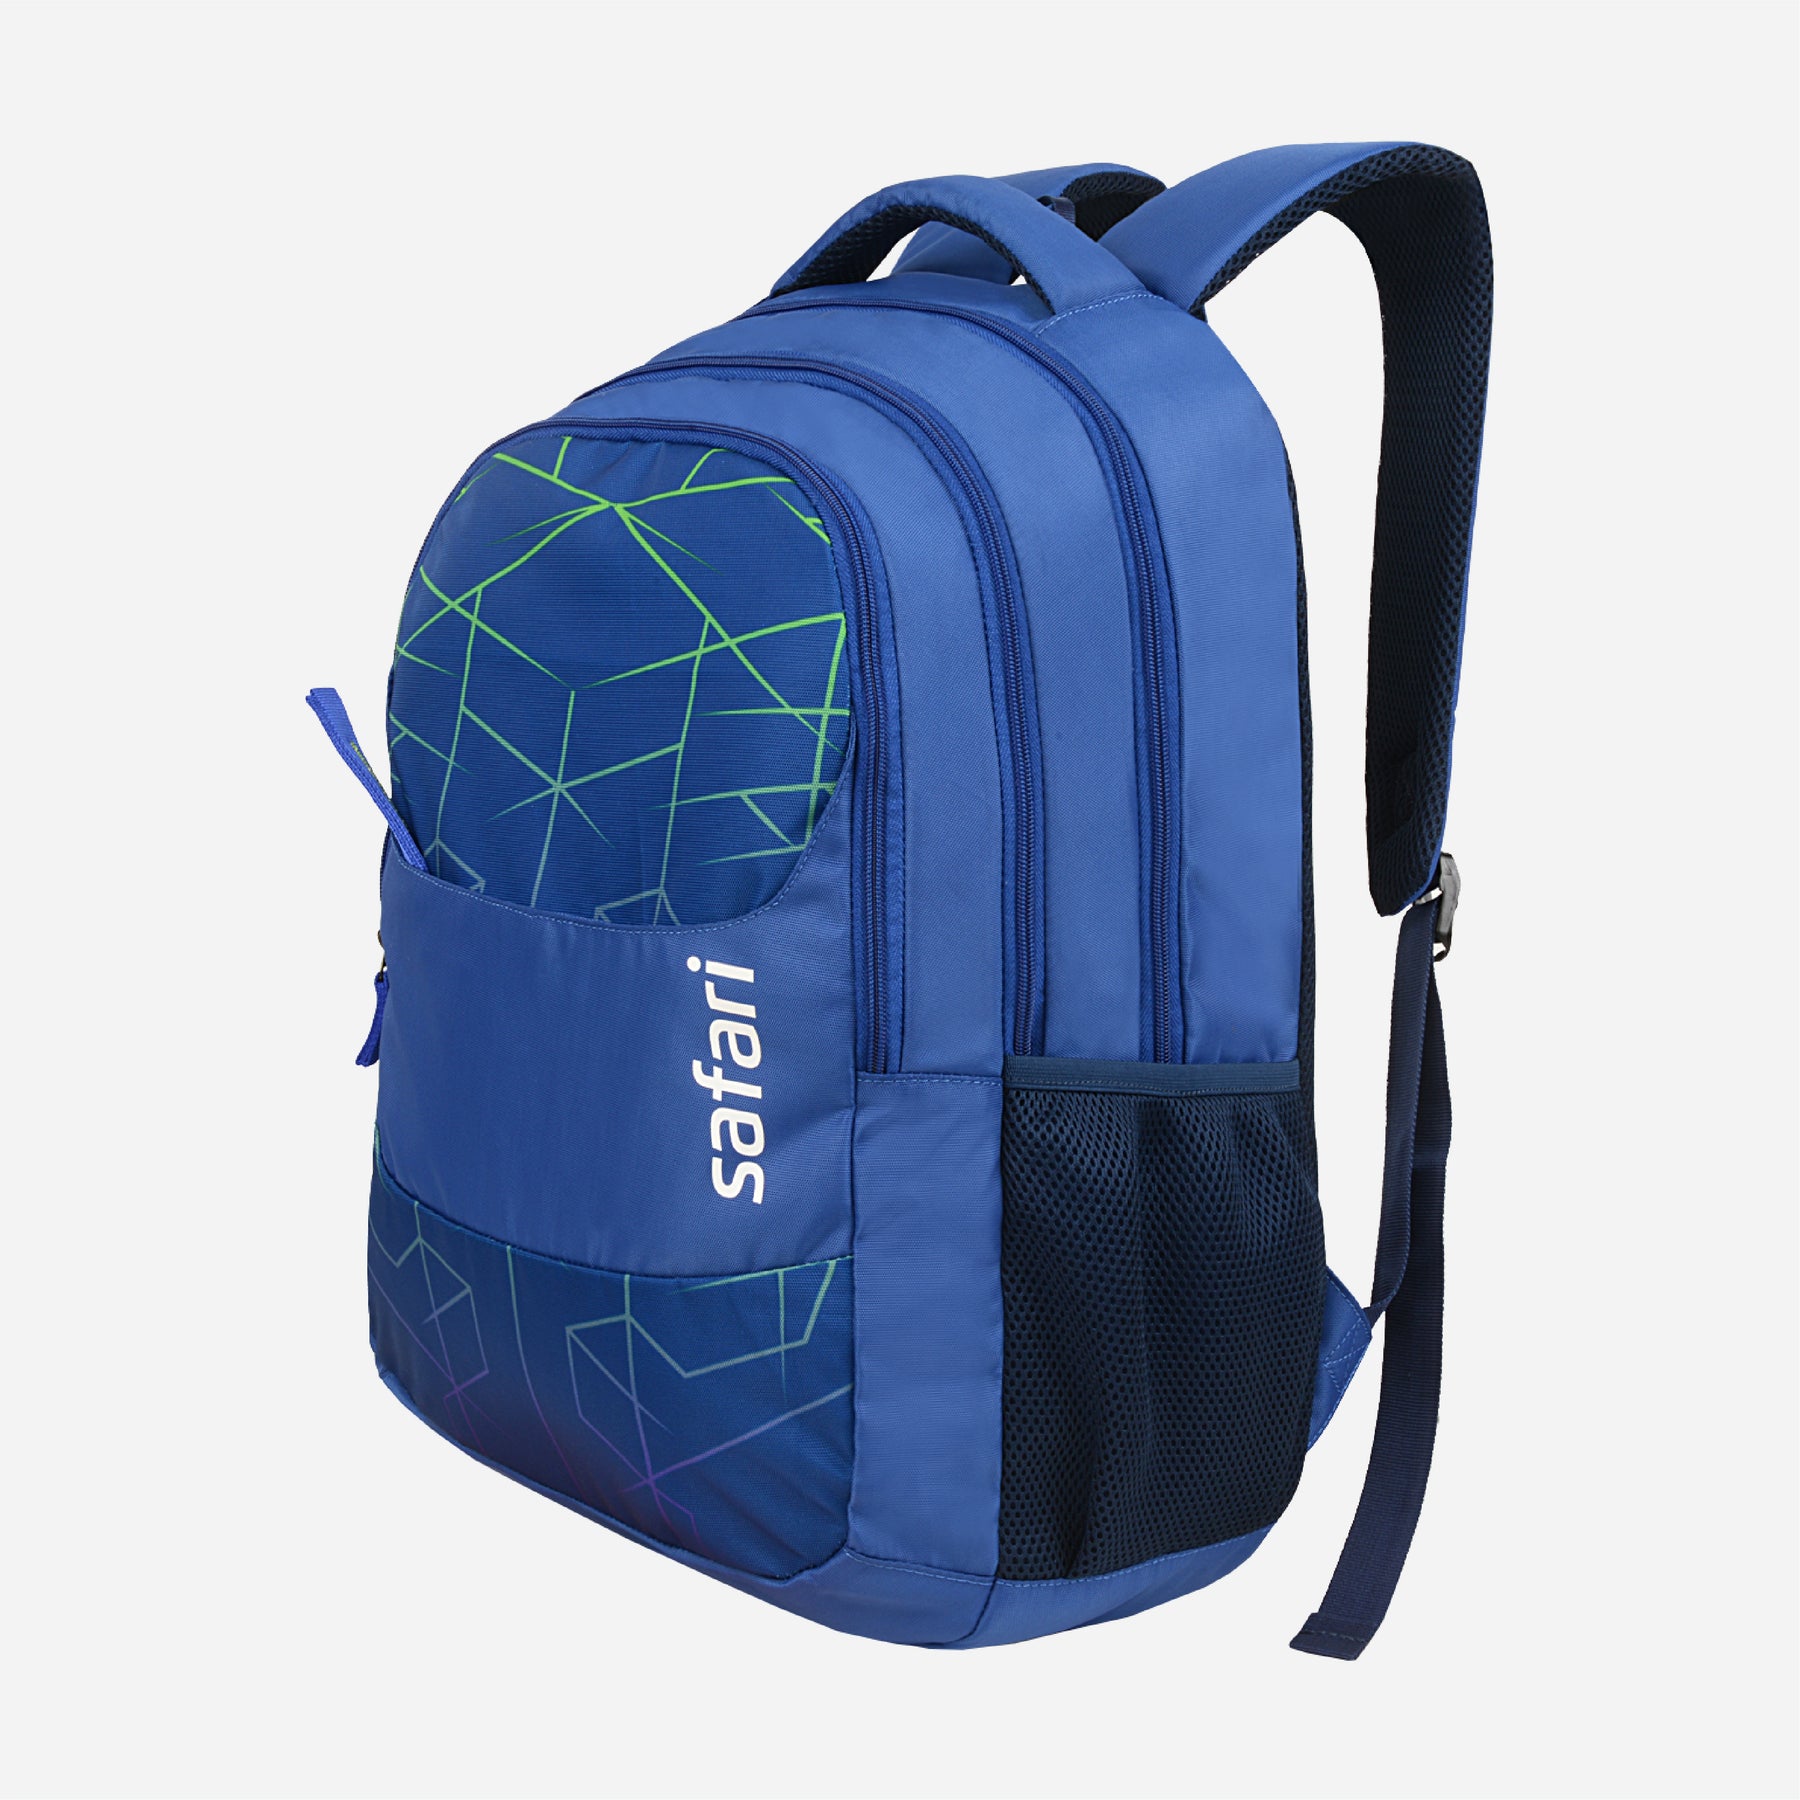 Safari Hi-Tech 30L Blue School Backpack with Padded Back & Easy Access Pockets